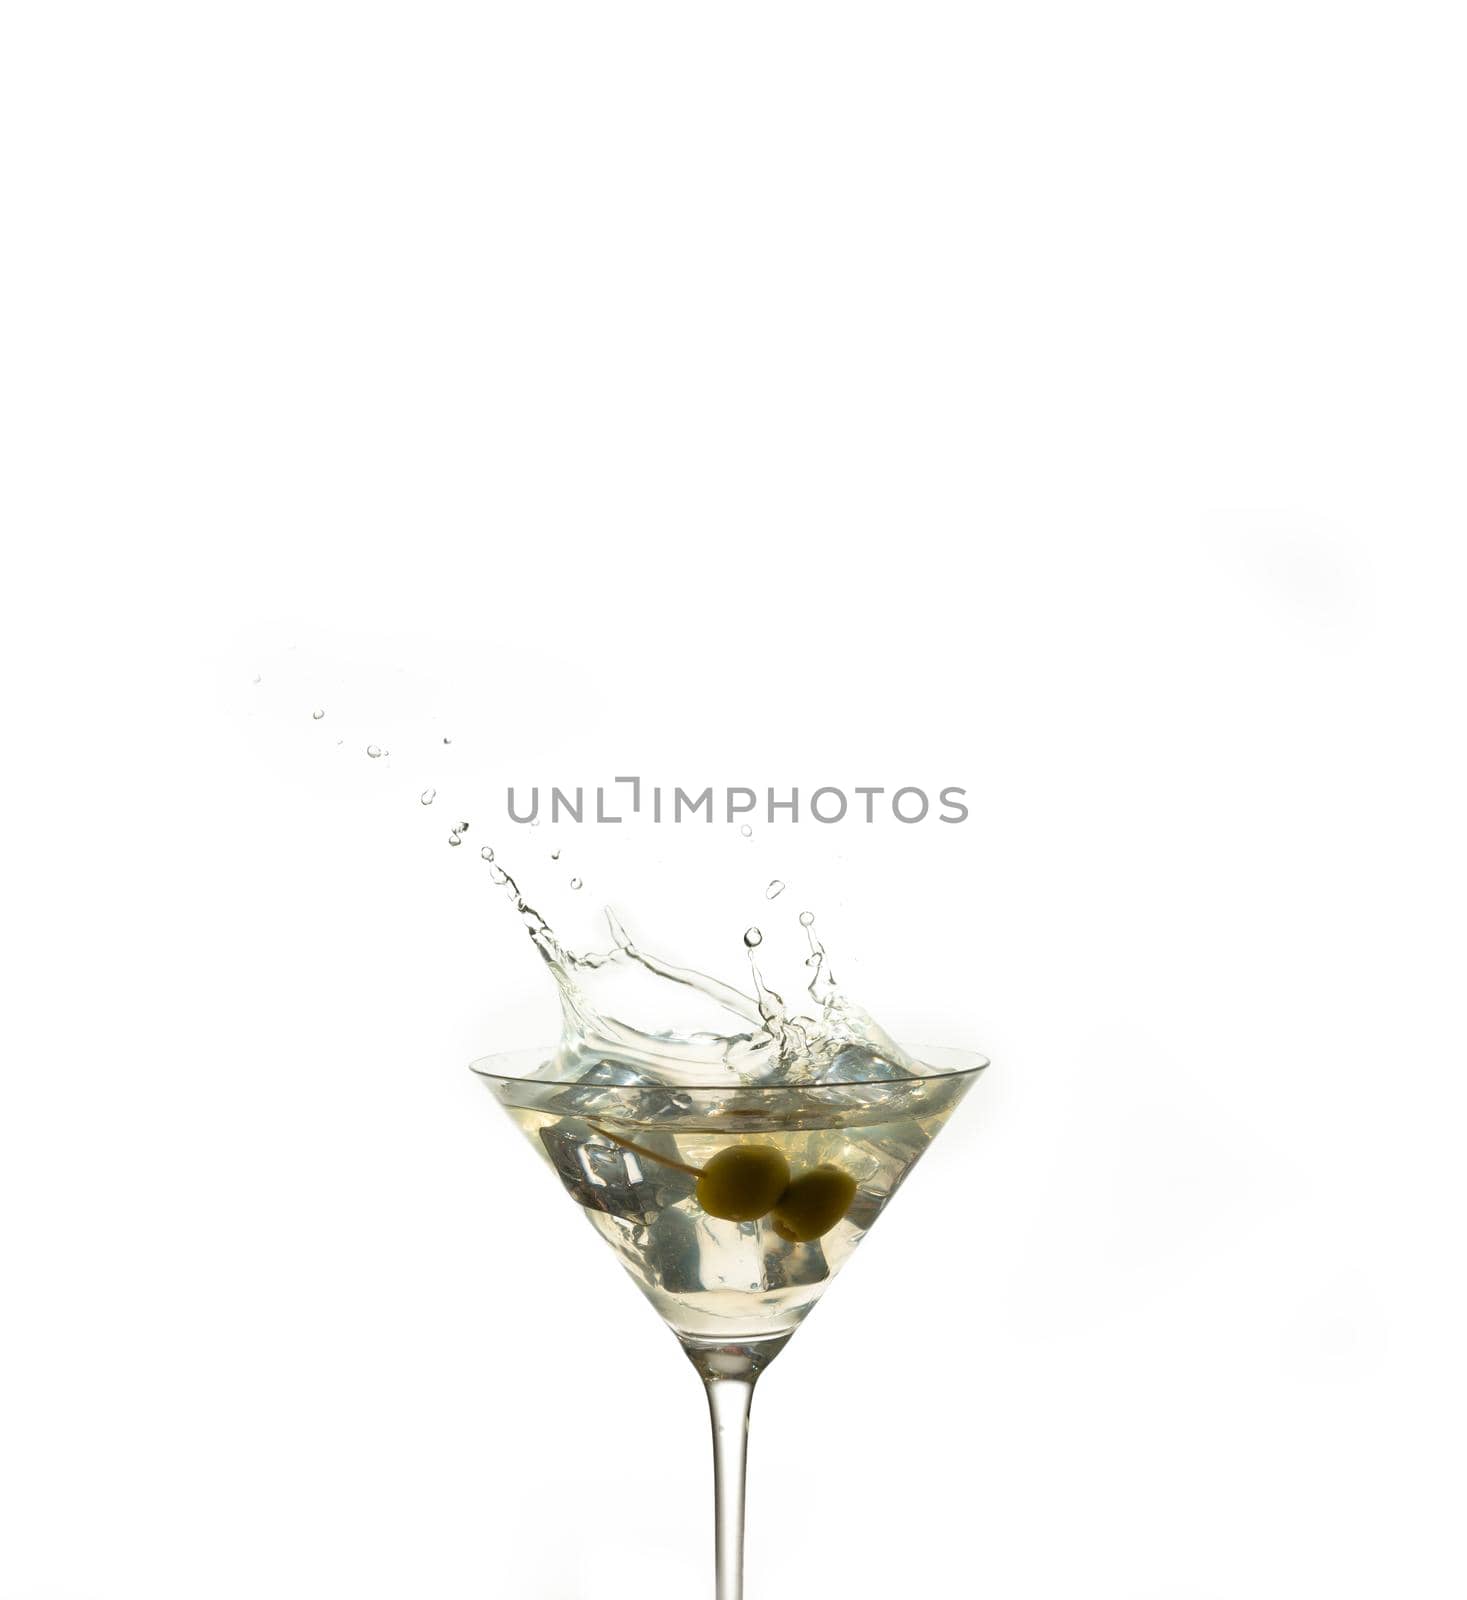 detail of a cocktail glass with an alcoholic preparation of ice and olives. Splash of an ice inside a crystal glass on a white background. drink concept by CatPhotography